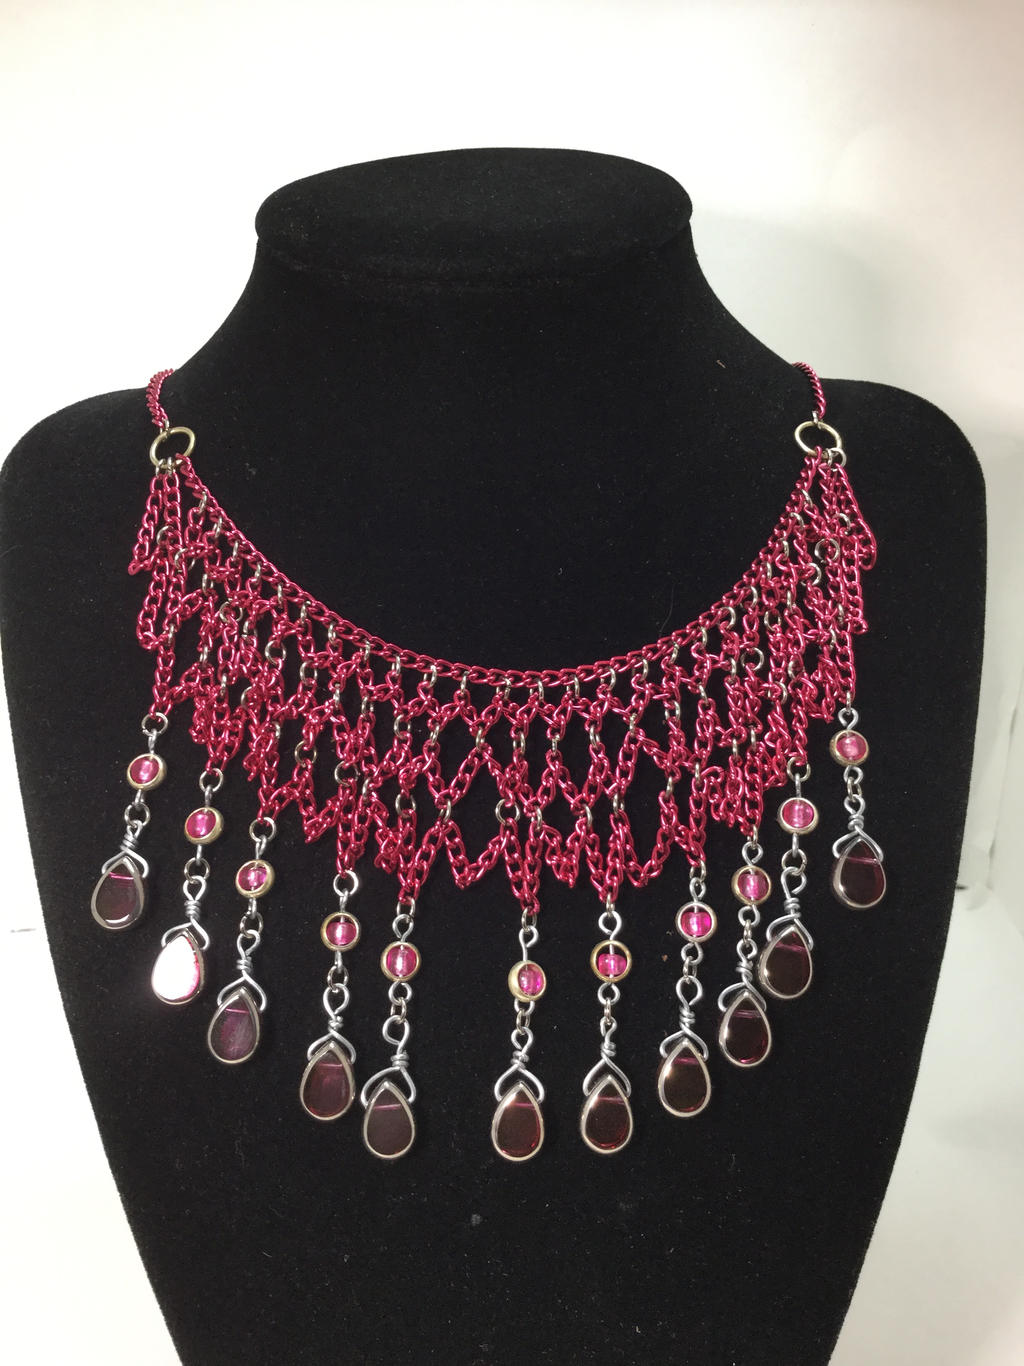 Pink mesh chain necklace